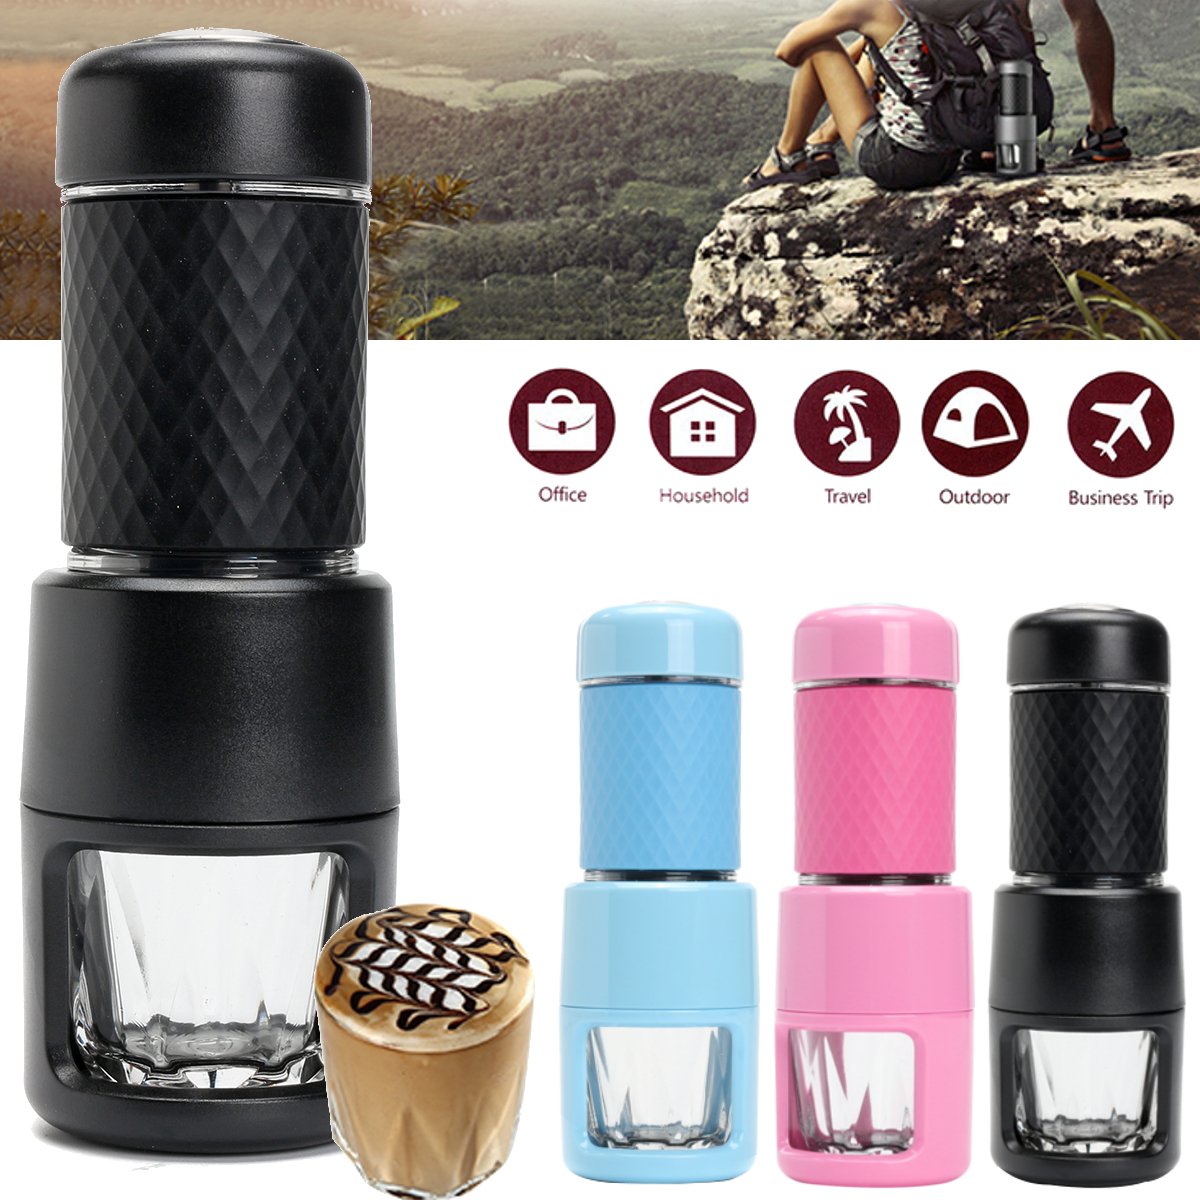 Portable Coffee Maker Travel Handheld Mini Manual Espresso Machine For Outdoor Camping Home Use 2